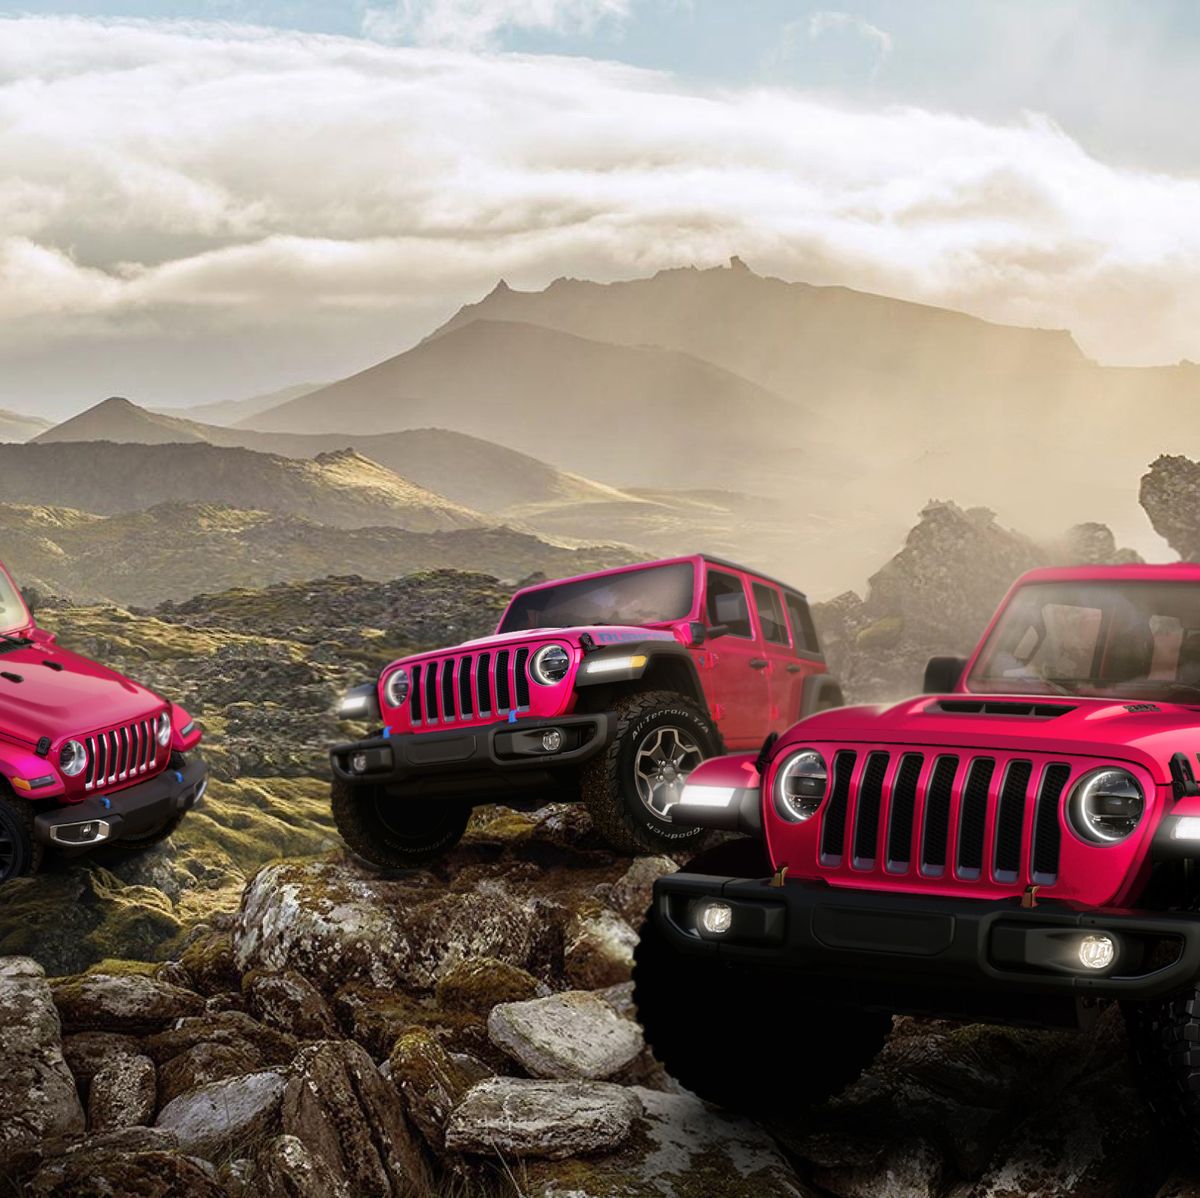 You Can Now Get a Pink Jeep Wrangler